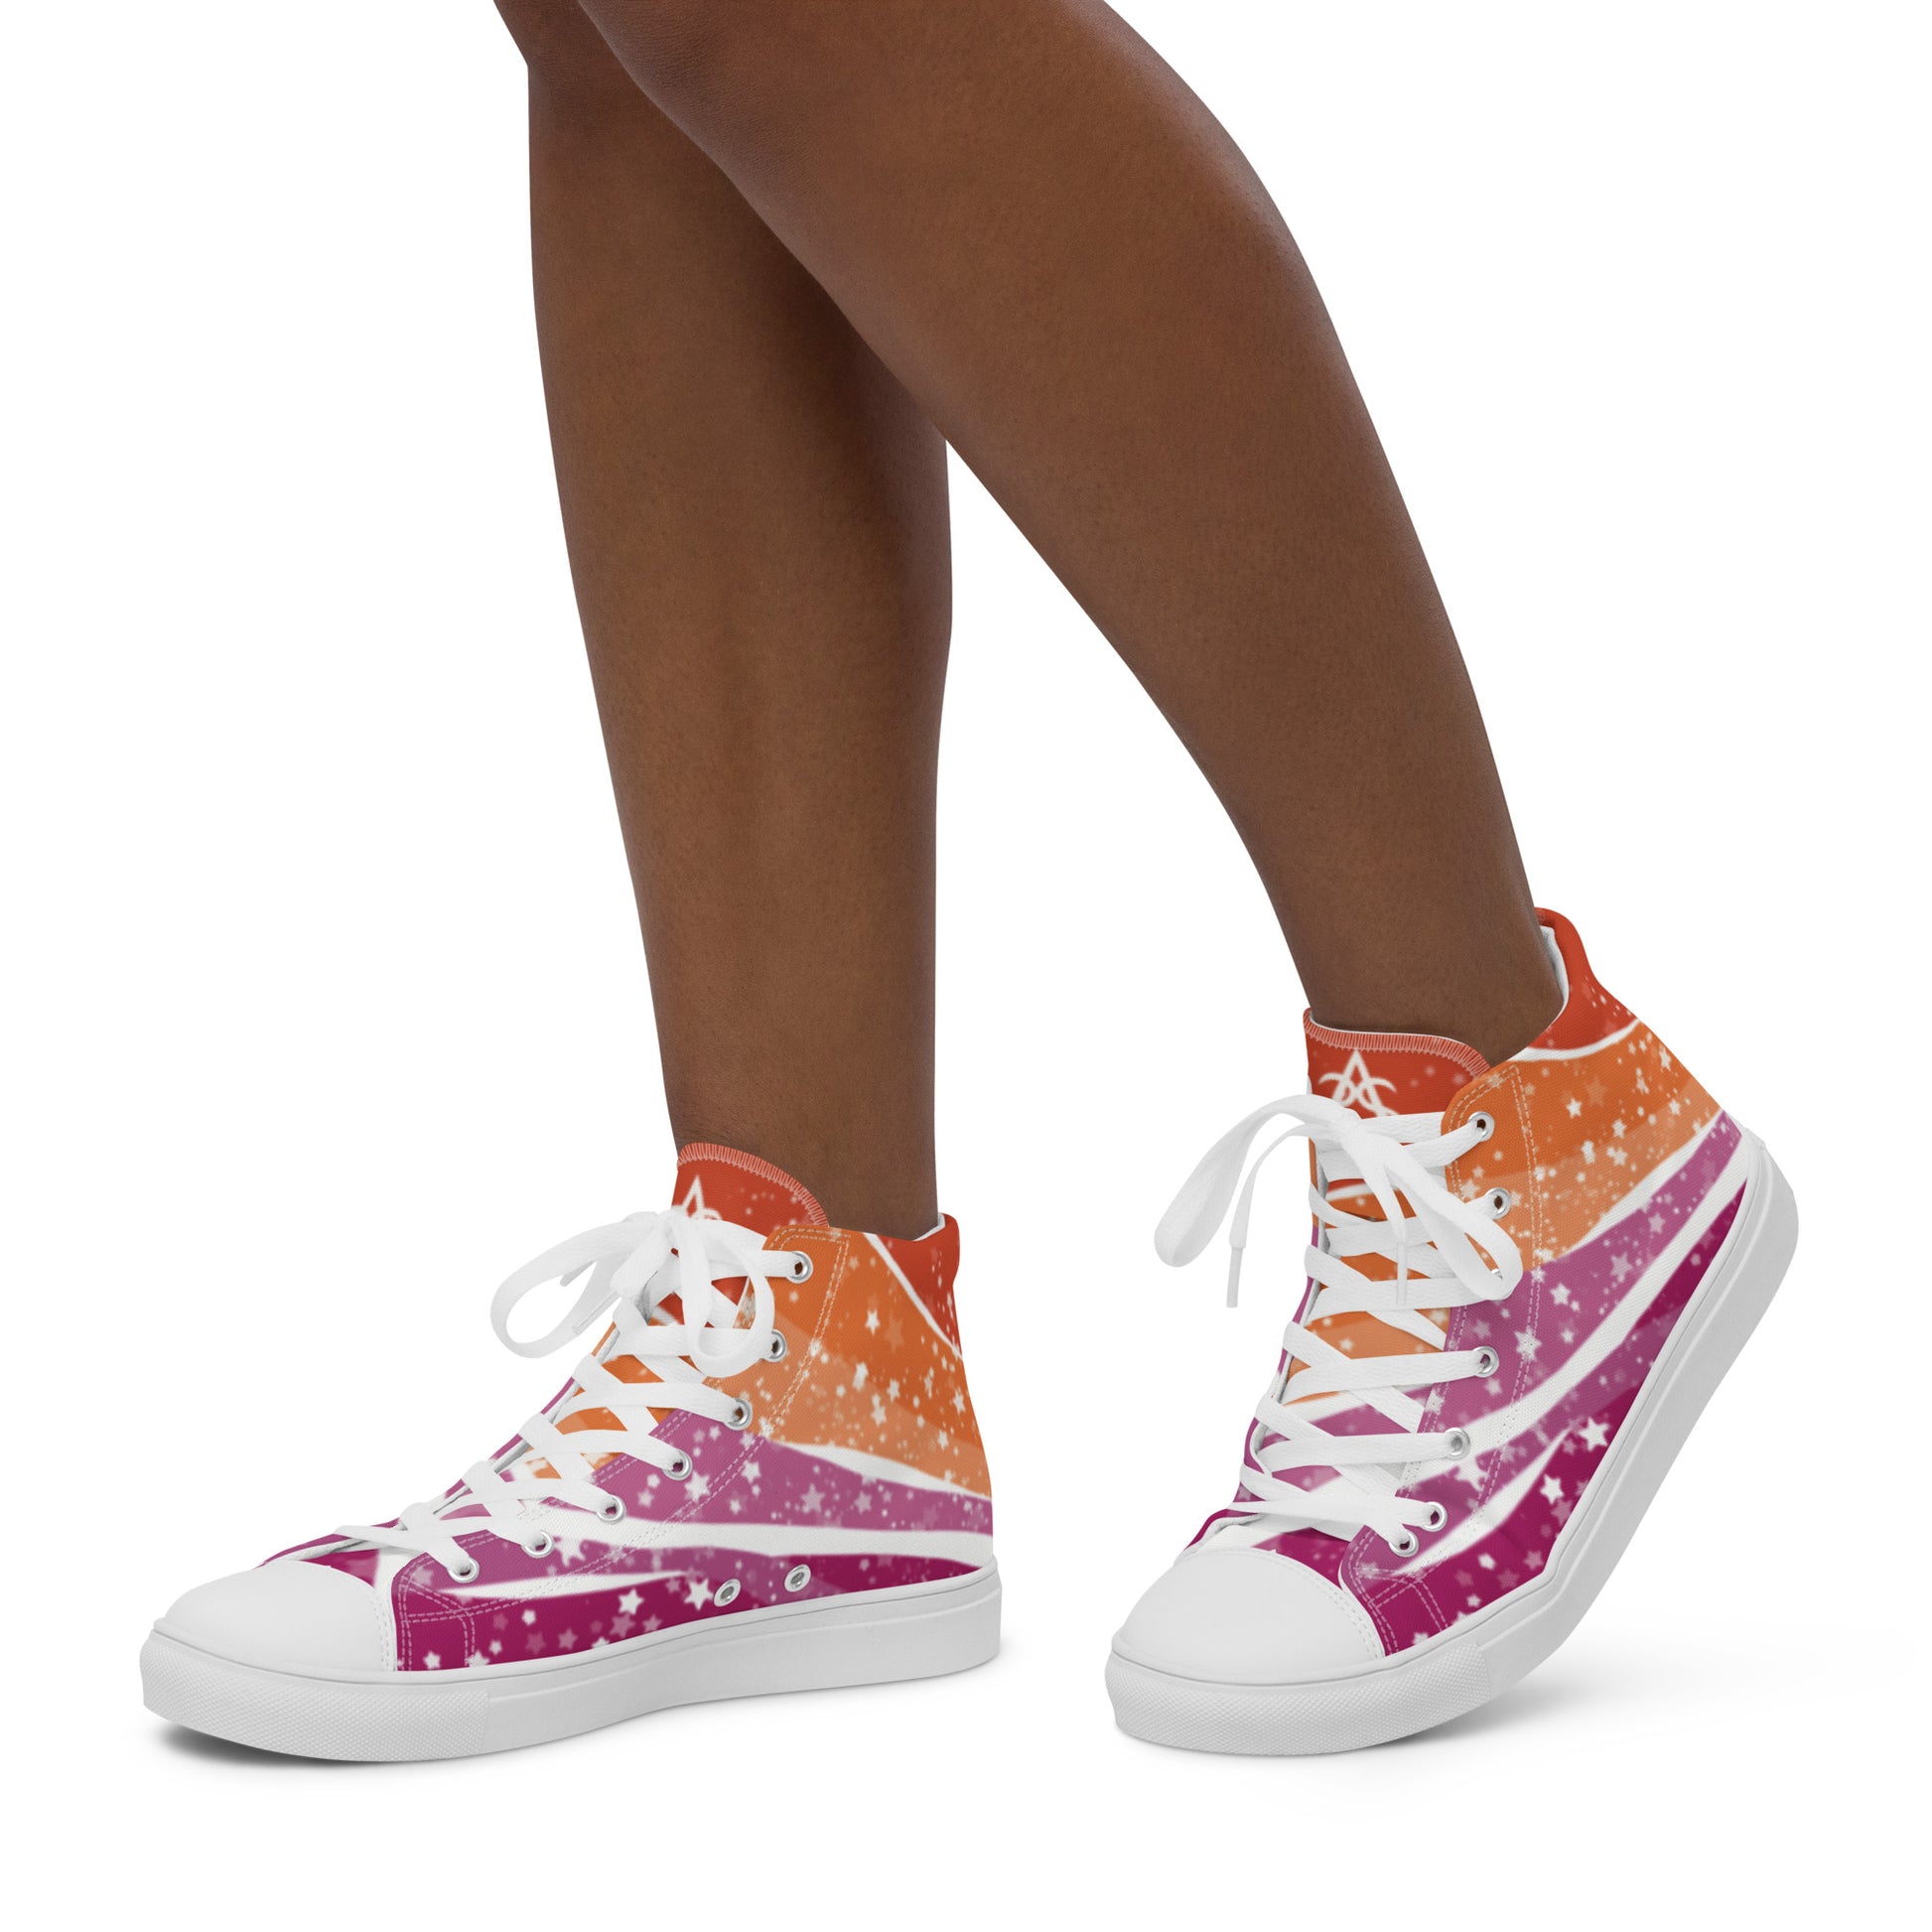 A model wears a pair of high top shoes with ribbons of lesbian flag colors and stars coming from the heel and getting larger across the shoe to the laces.